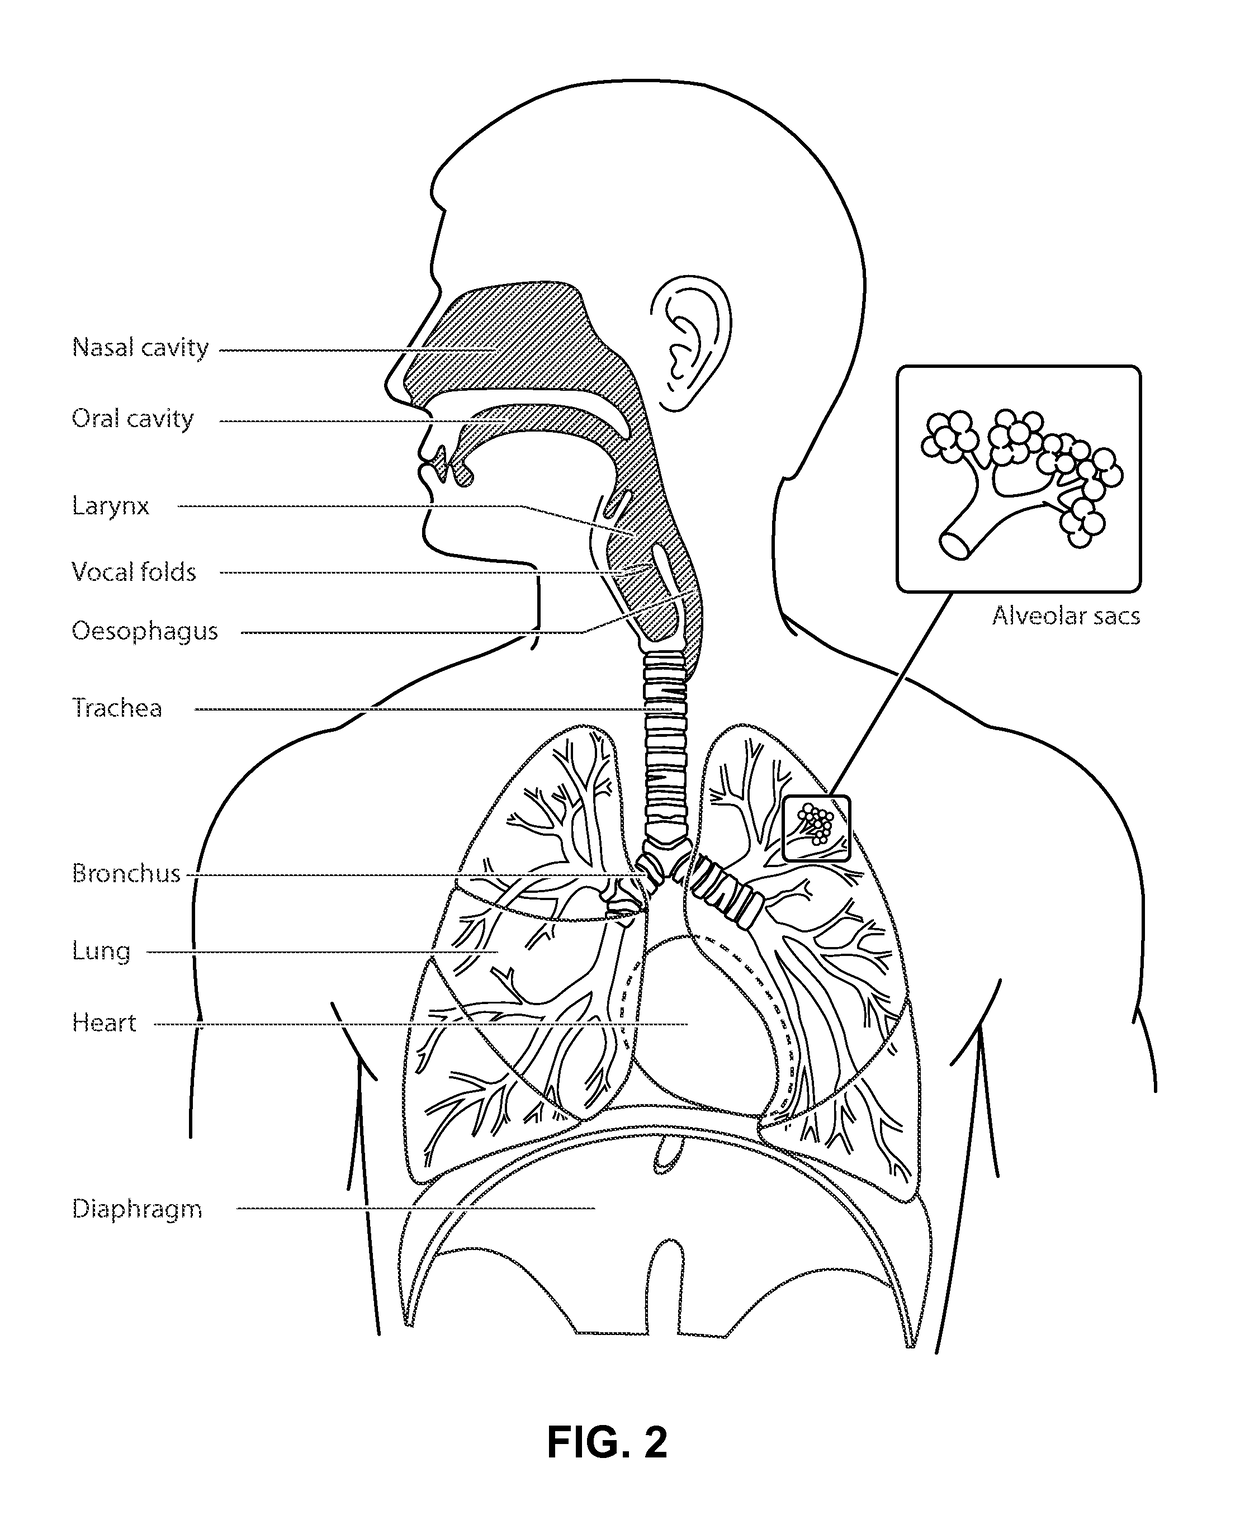 Self-optimising respiratory therapy system